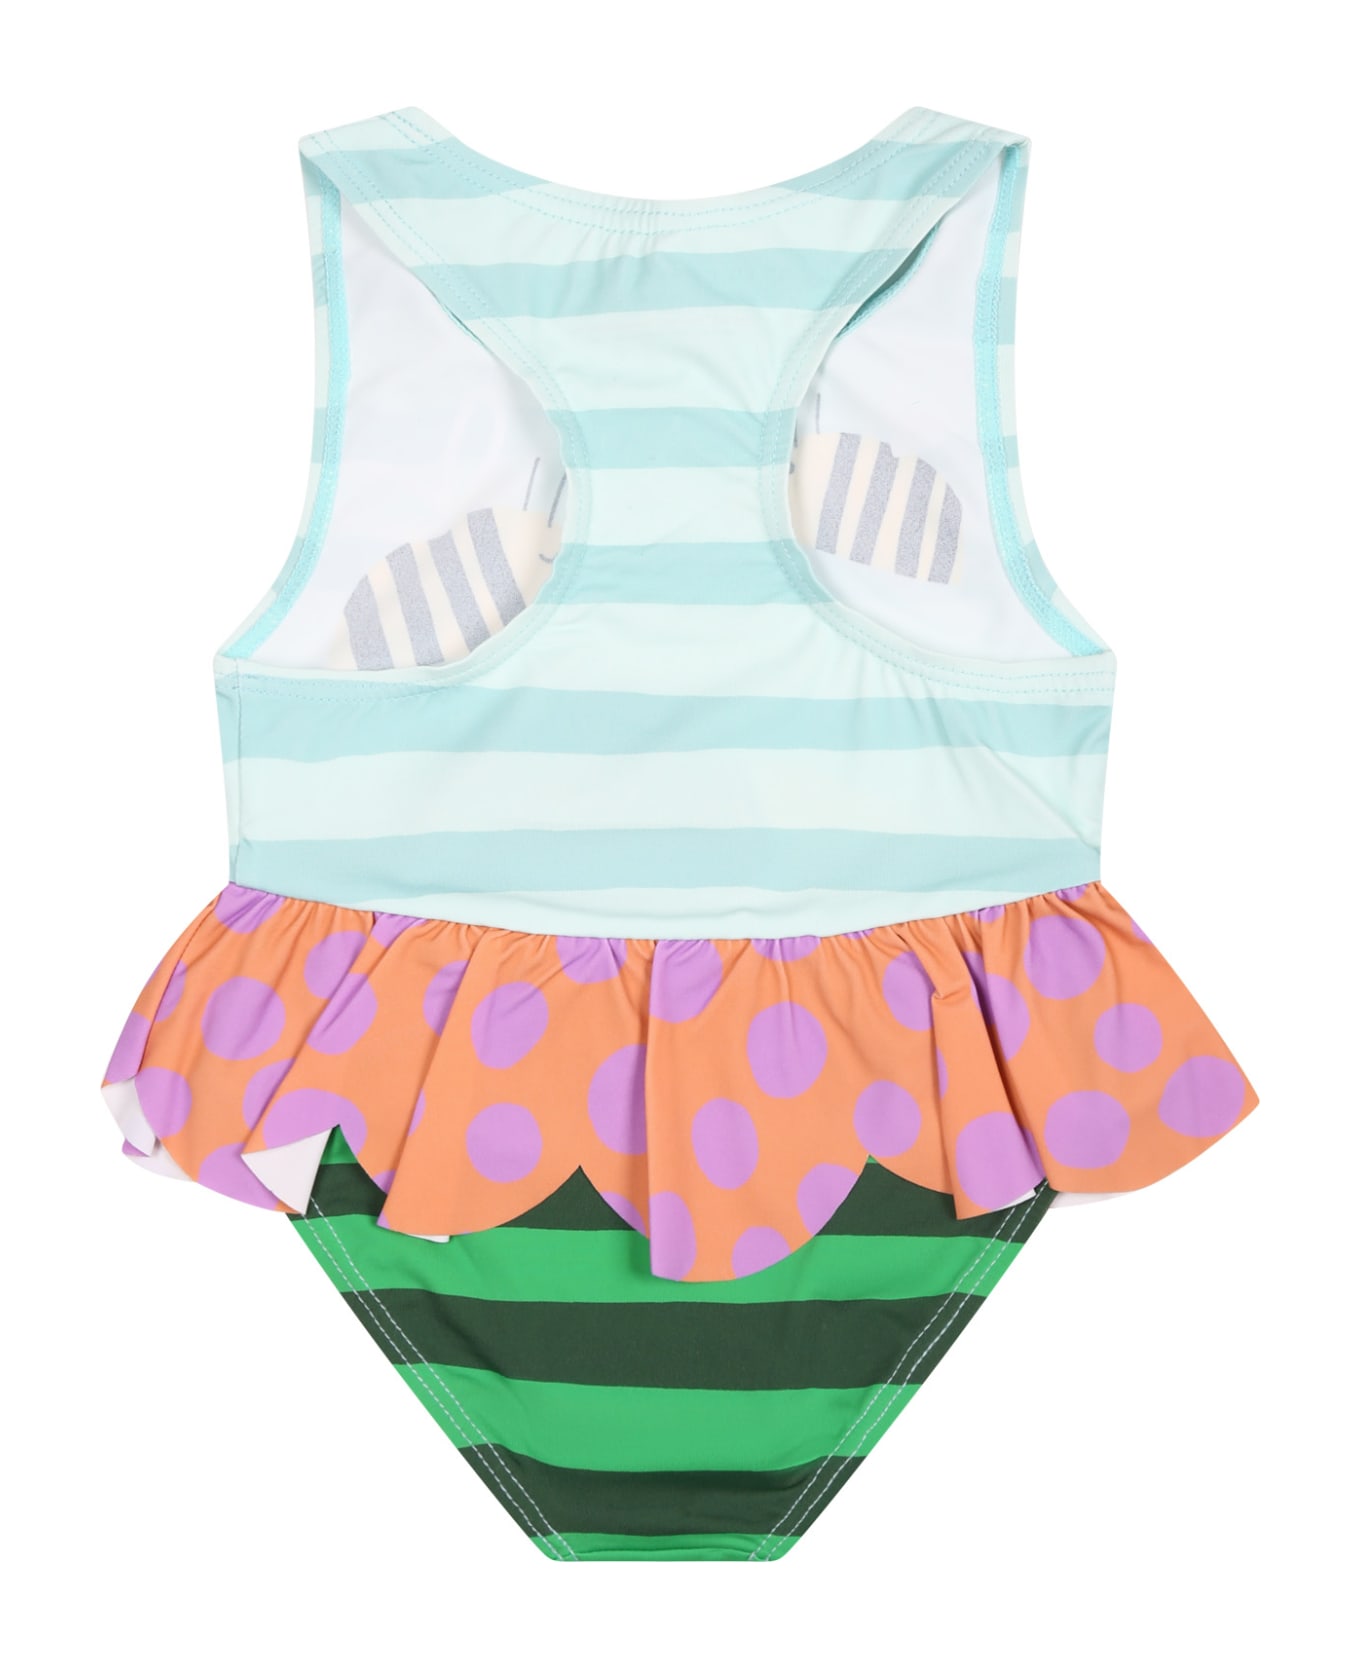 Stella McCartney Kids Light Blue Swimsuit For Baby Girl With Bees - Multicolor